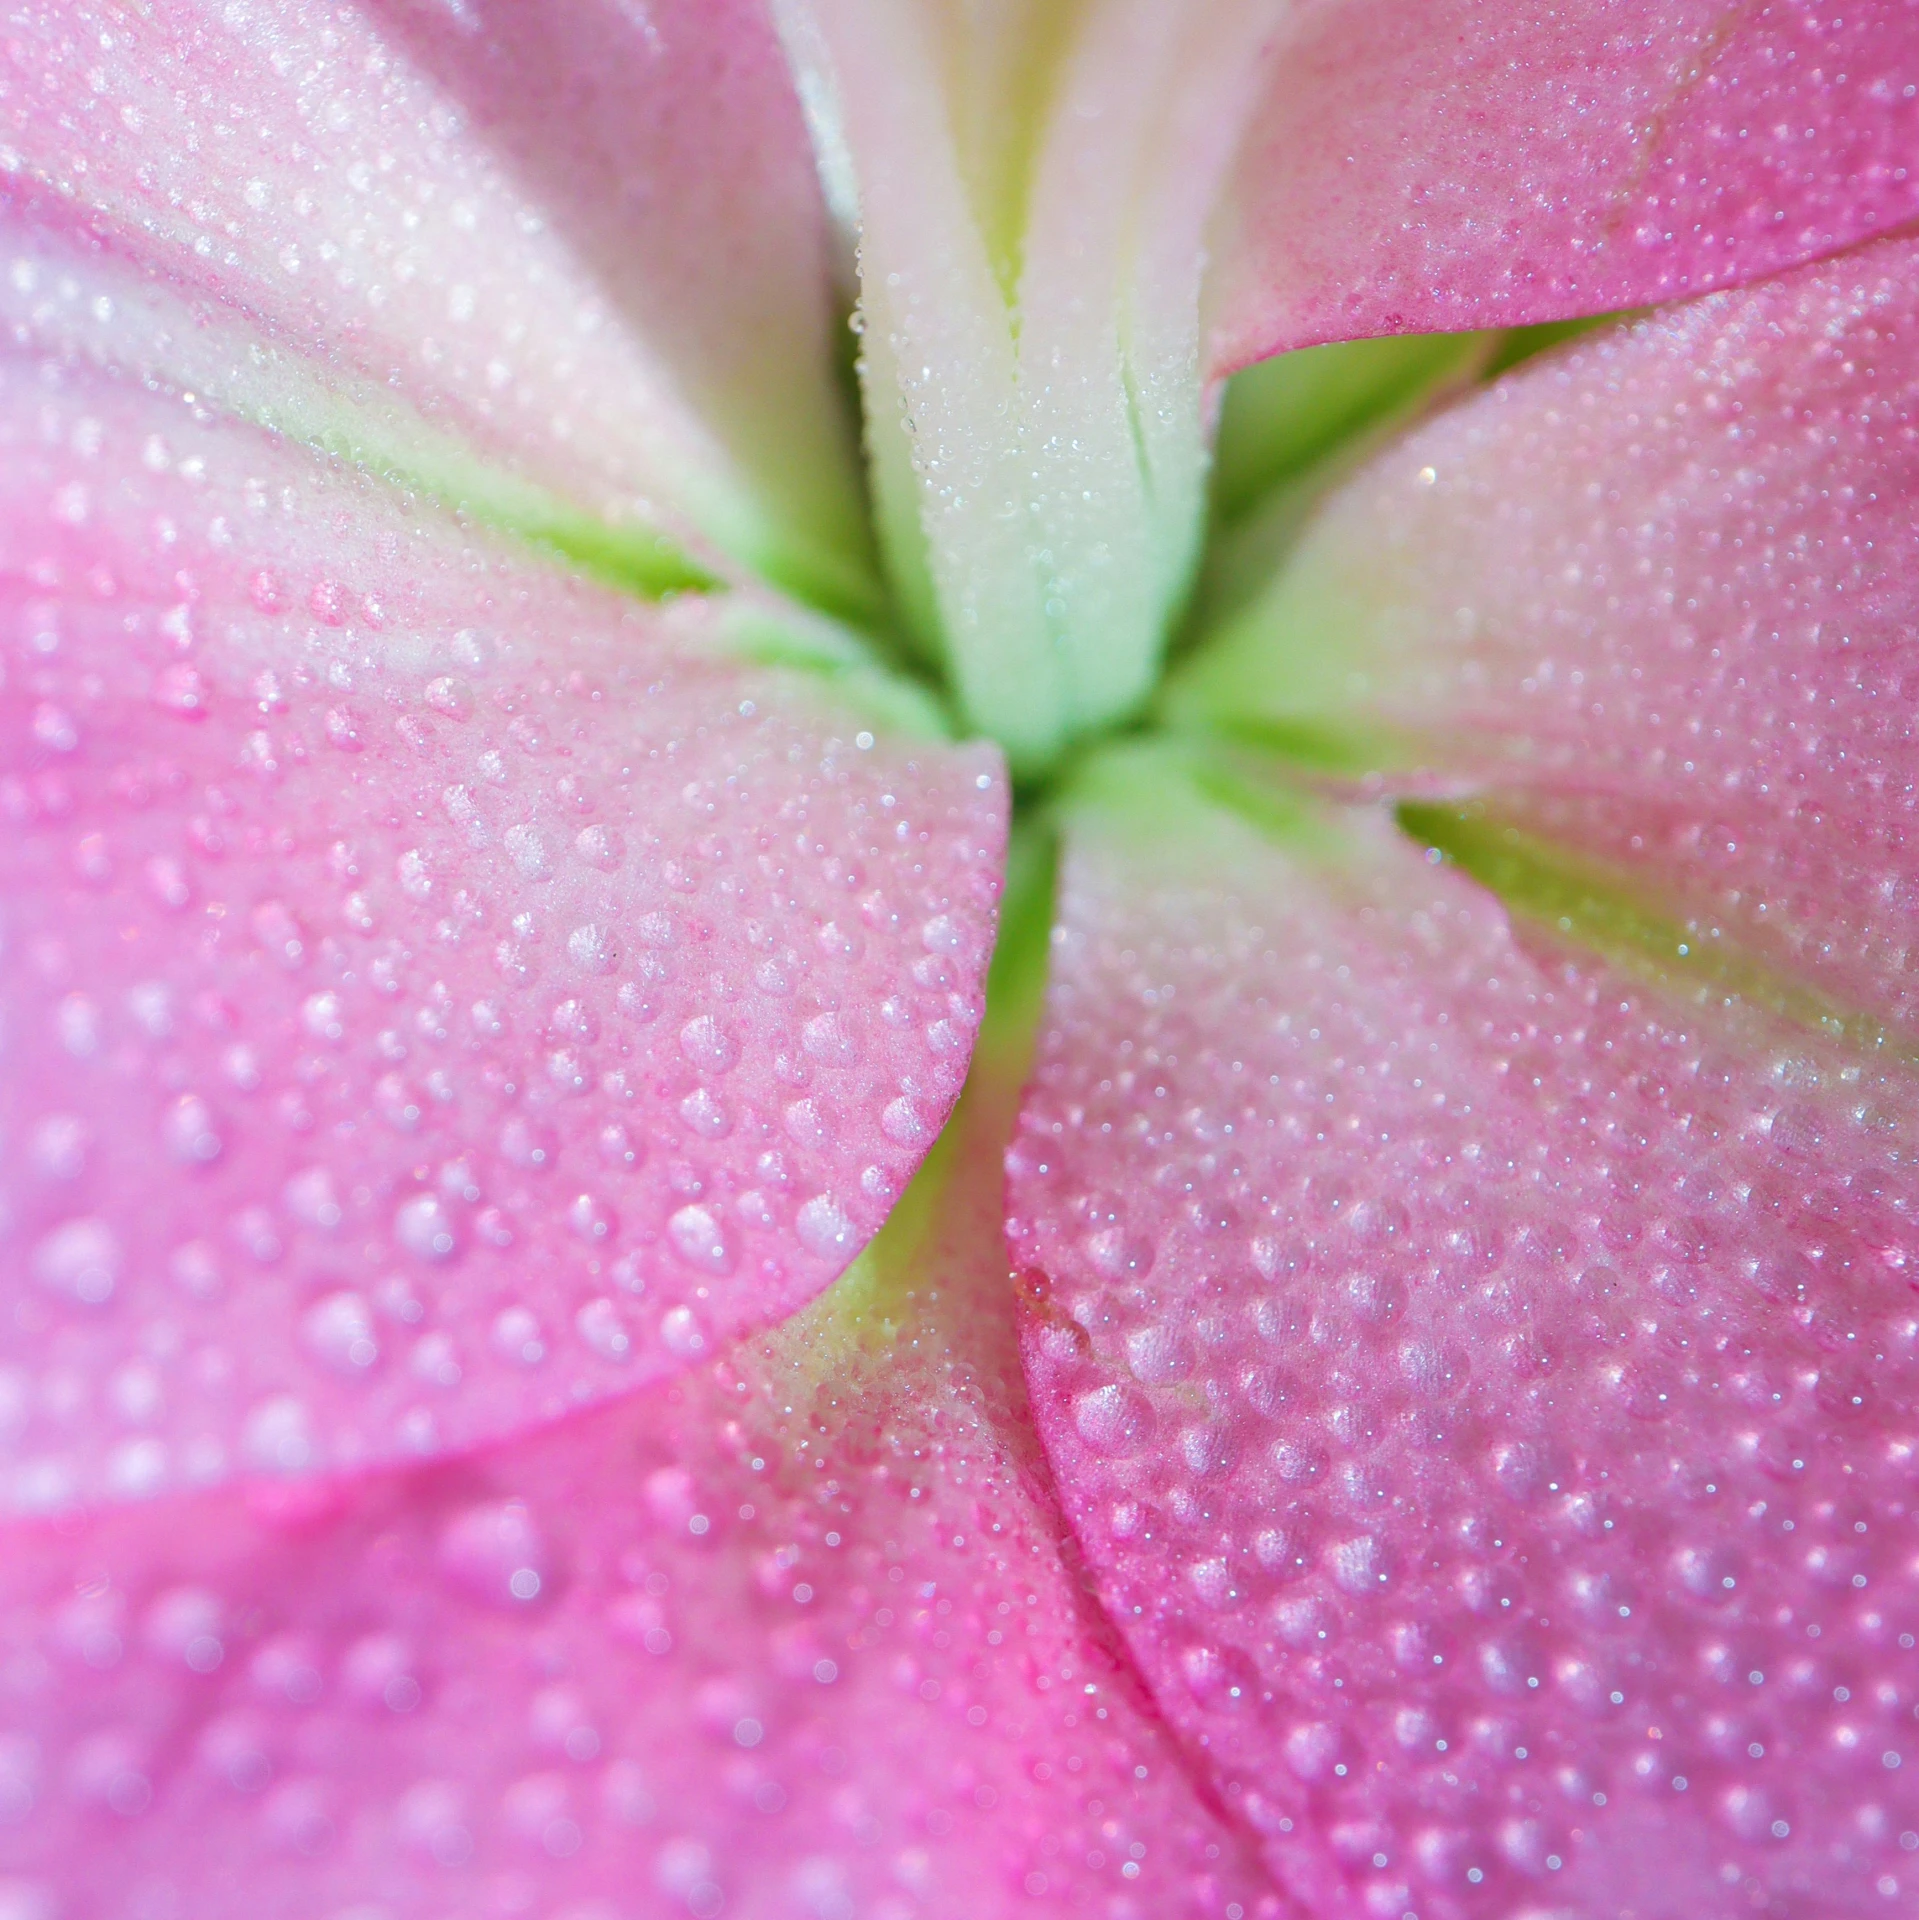 a pink flower with droplets on its petals